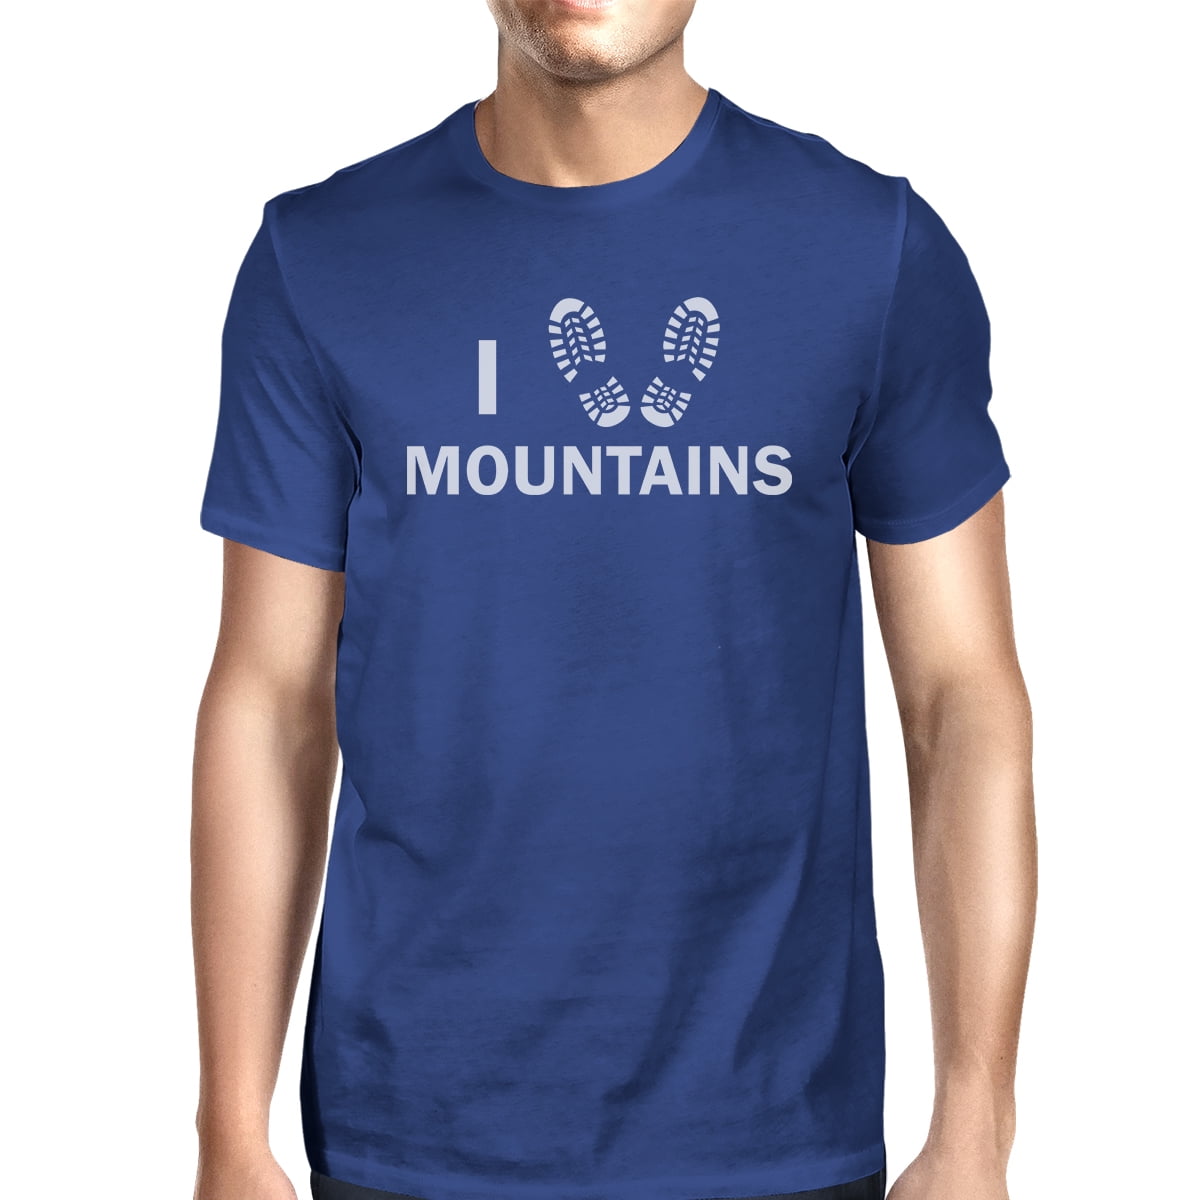 Details about   I Heart Mountains Men's Blue Short Sleeve Round Neck Cotton Tee